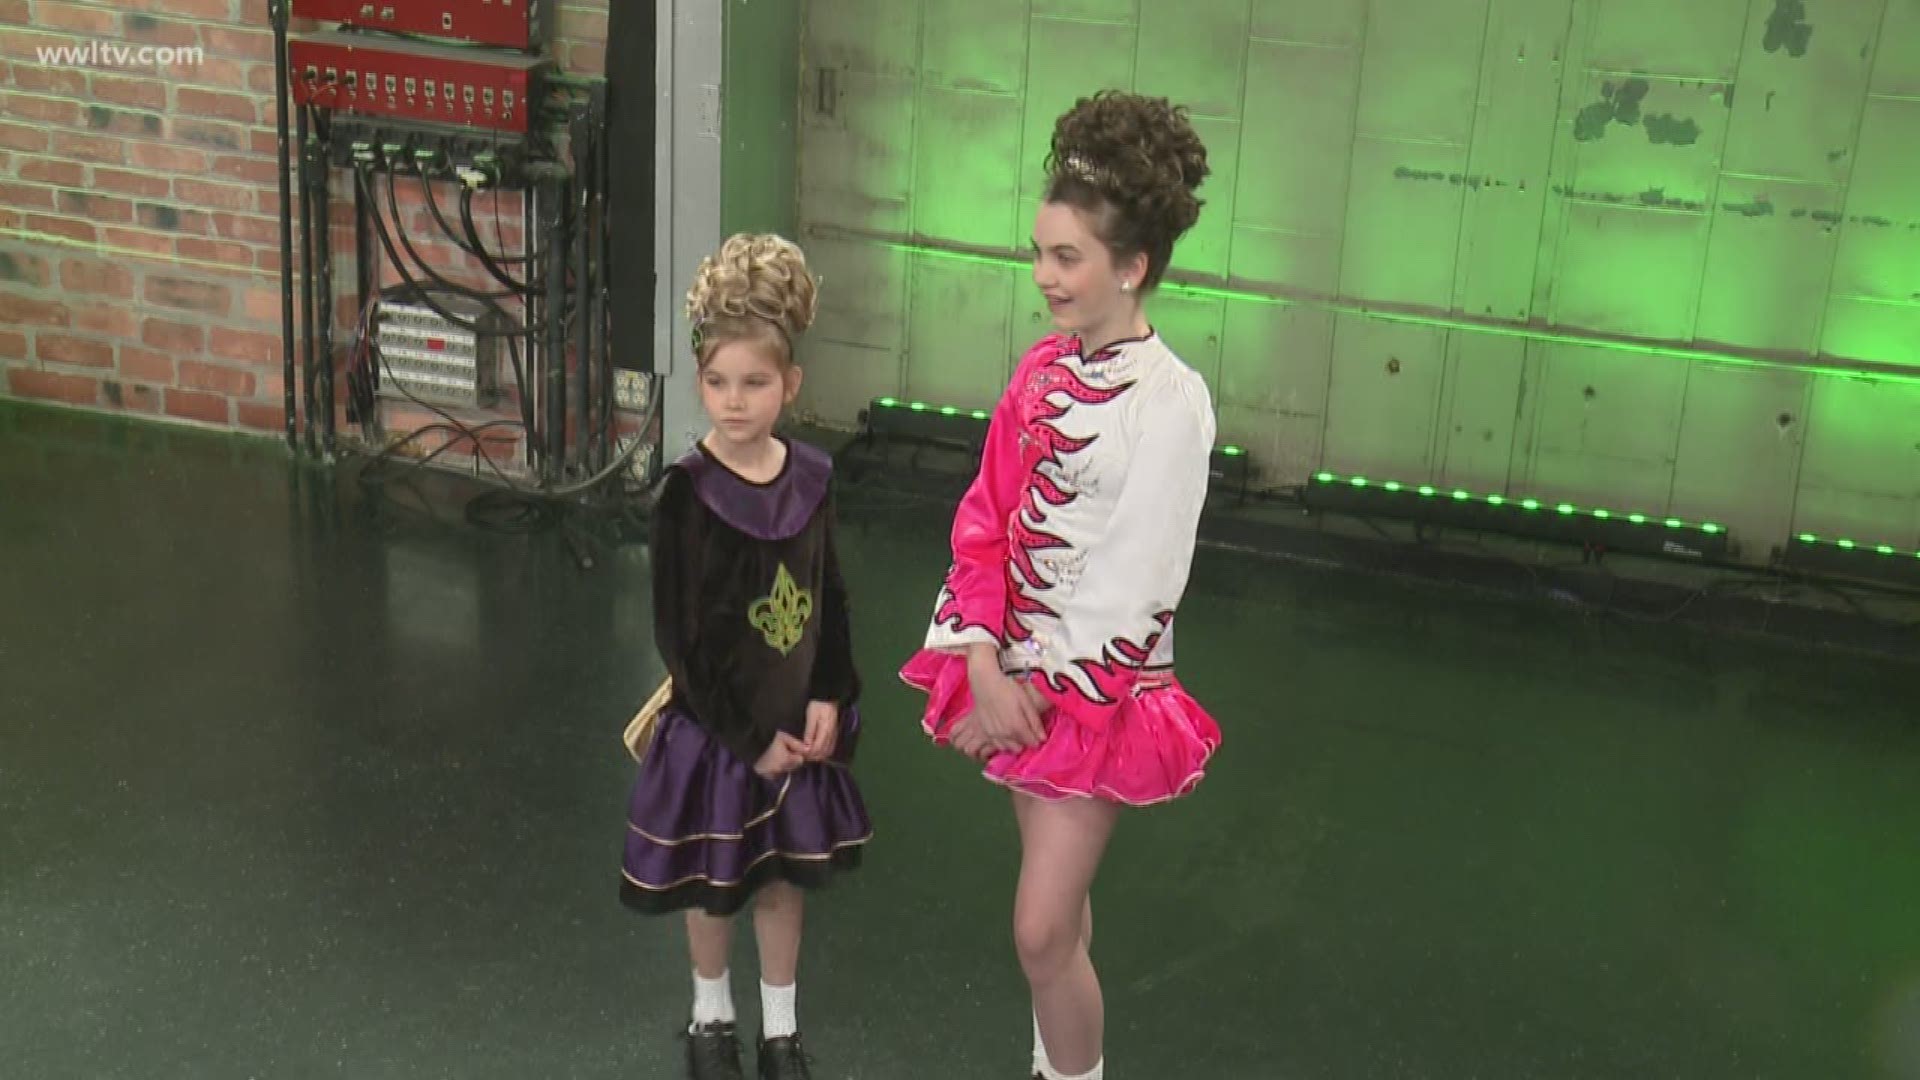 We are enjoying some Irish dancing by two talented students from Ryan School of Irish Dance ahead of St. Patrick's Day and Instructor Sara Adoue has some information on how you can join them.